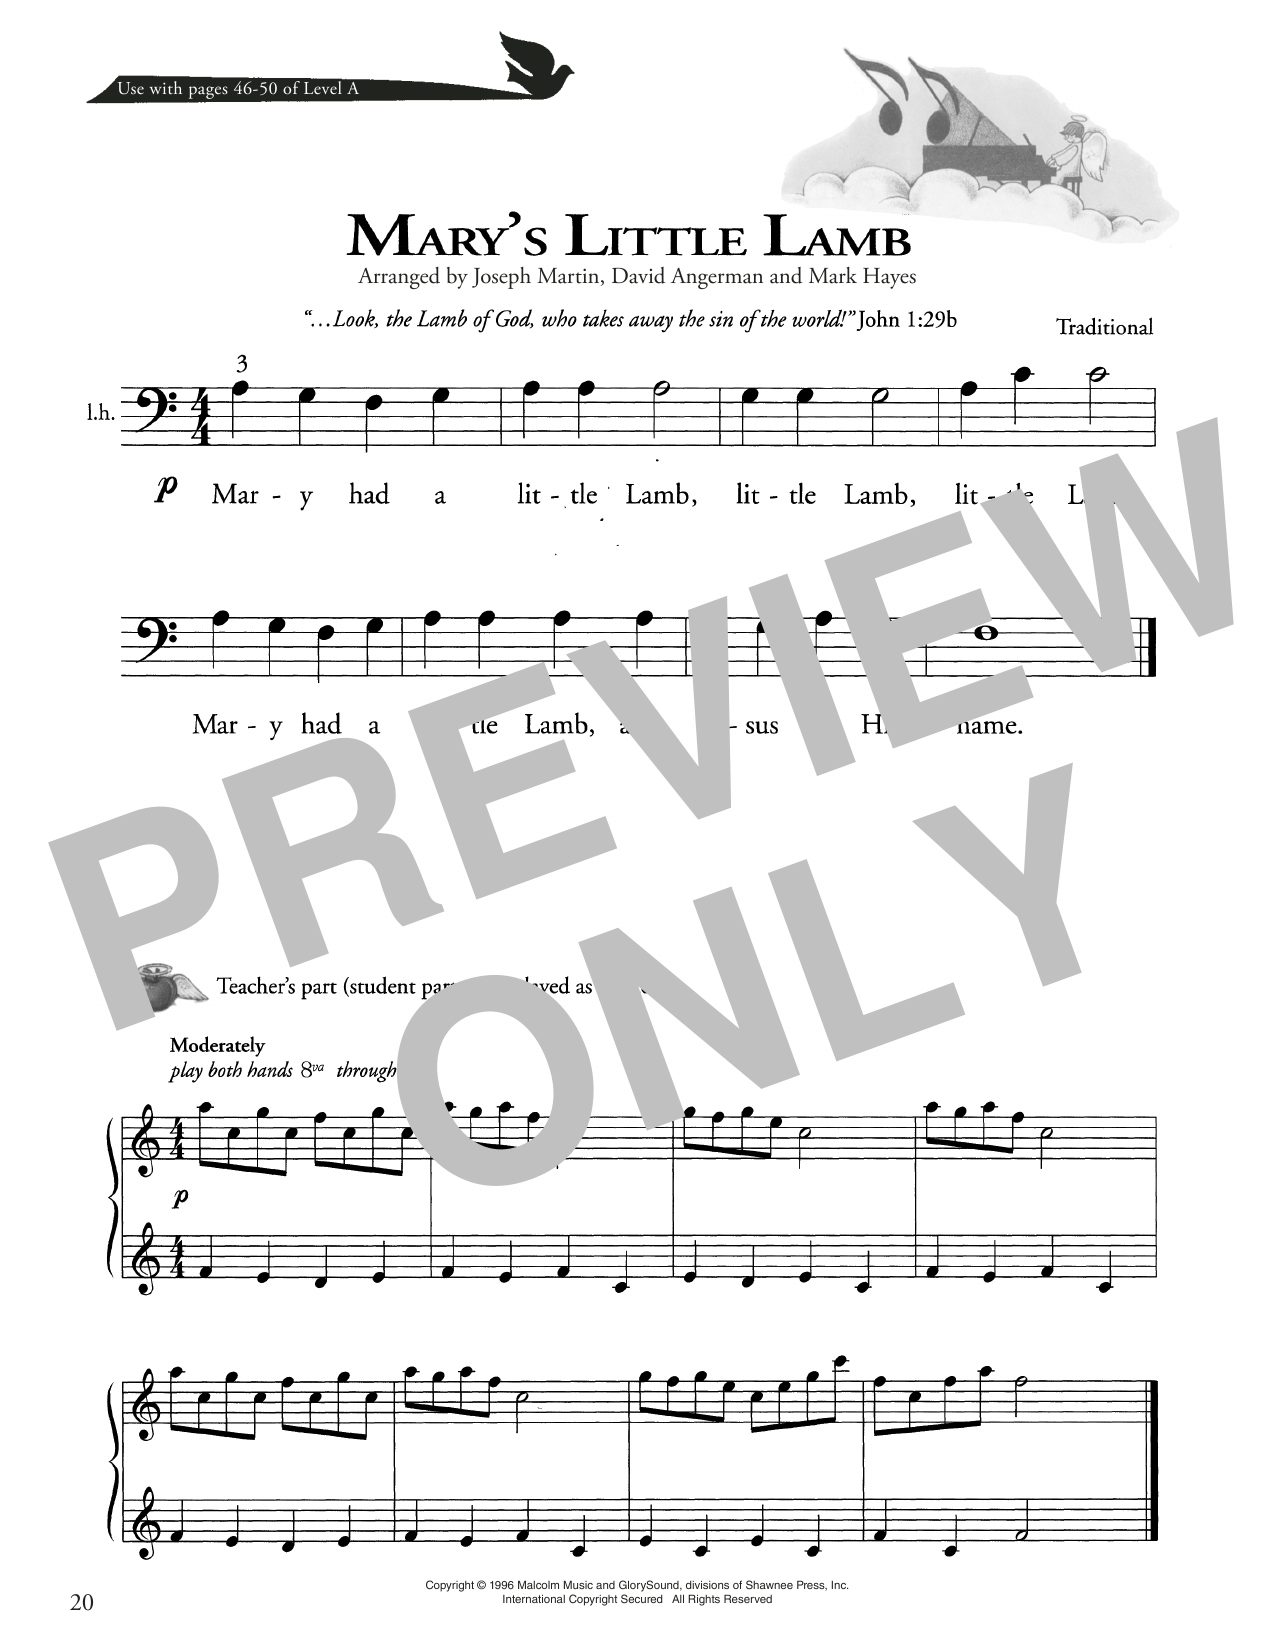 Download Traditional Mary's Little Lamb Sheet Music